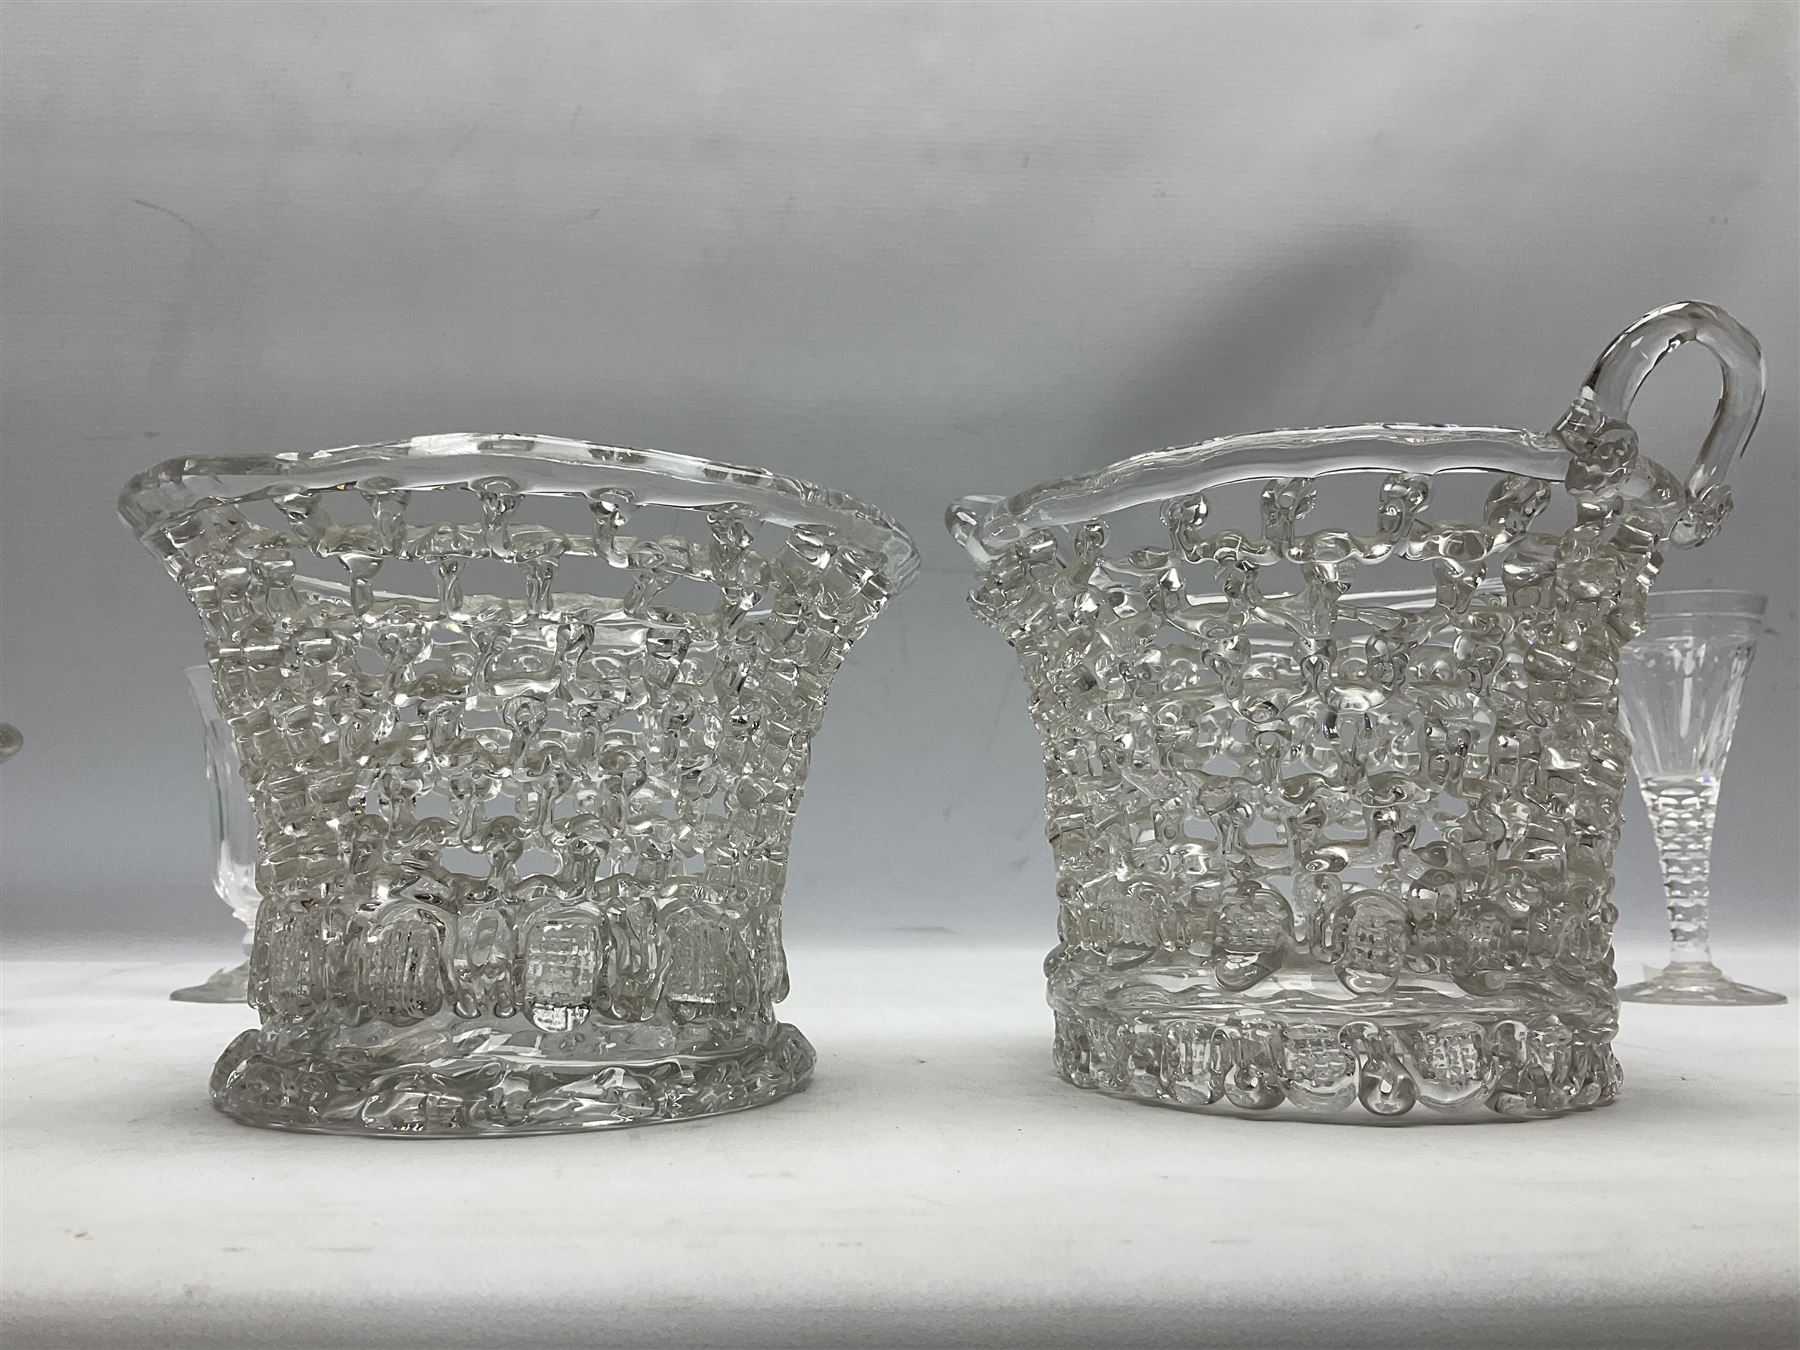 Pair of 19th century Lieges trailed glass openwork baskets of oval form with wrythen loop handles - Image 7 of 10